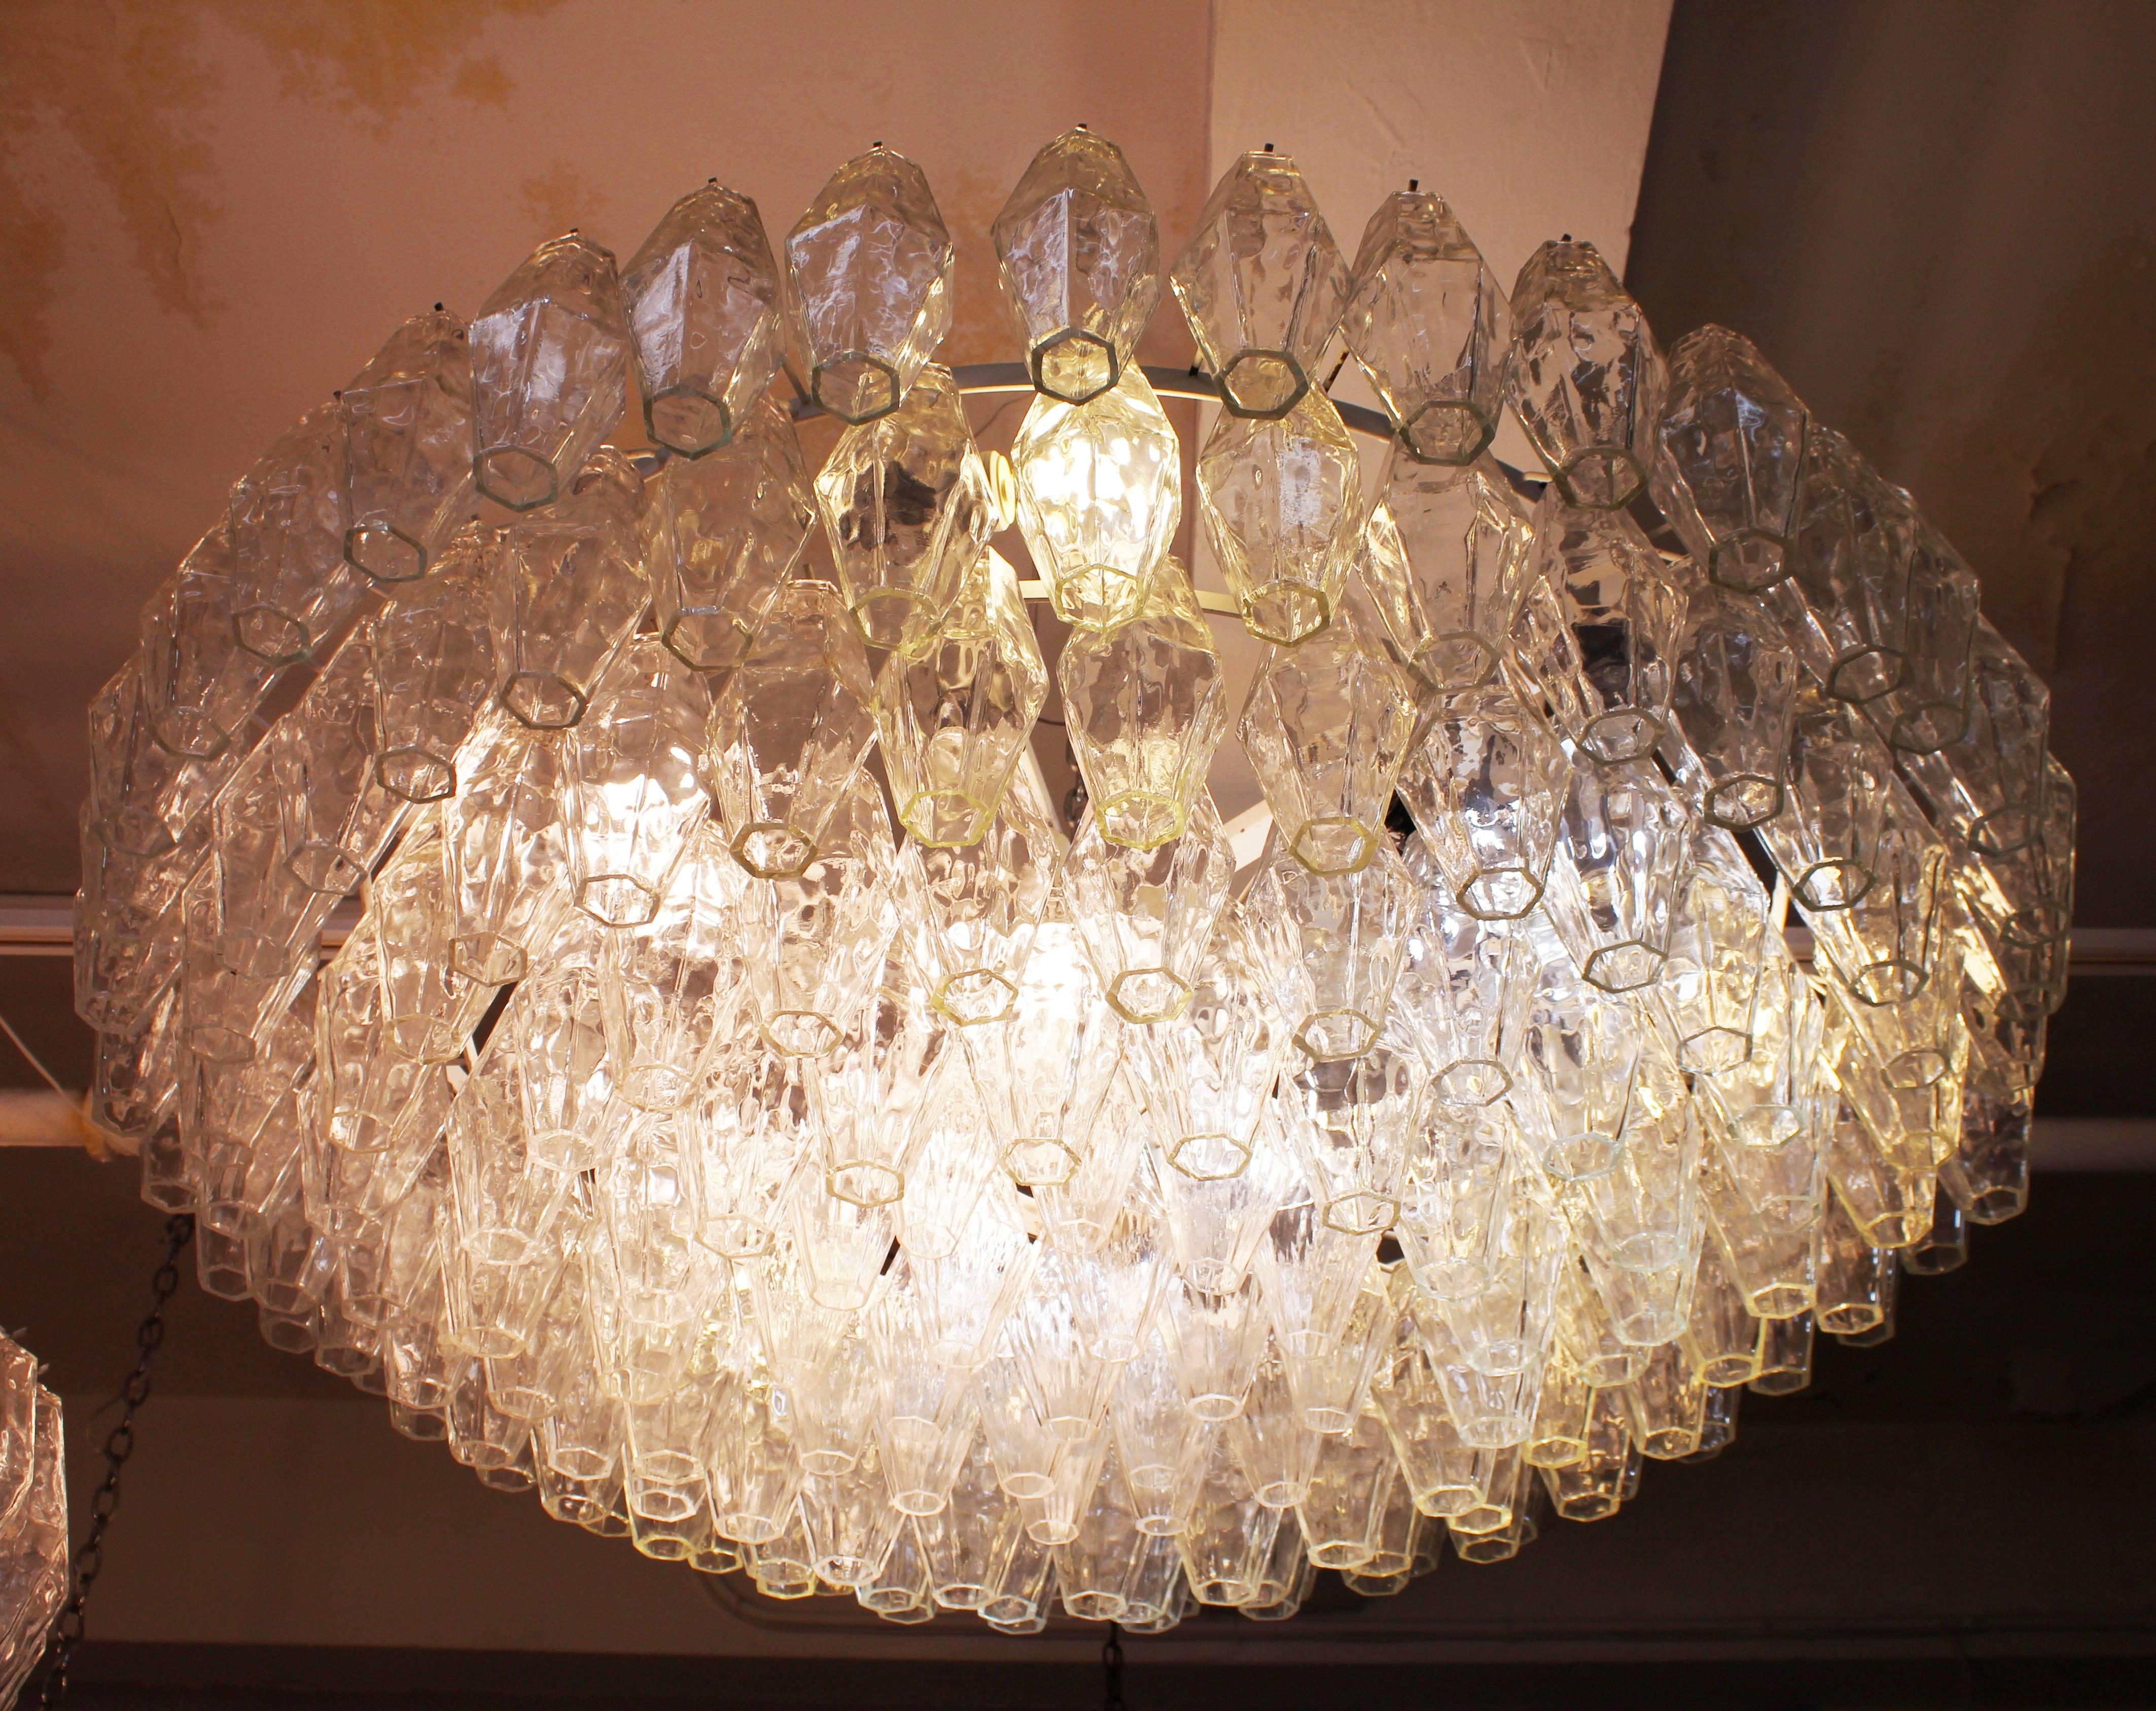 Large sized Murano glass chandelier, made of multiple tiers of polyhedral glass prisms on a white metal frame. The chandelier was made in Italy in the 1960s. The piece remains in good vintage condition, with some loss of paint finish to frame and